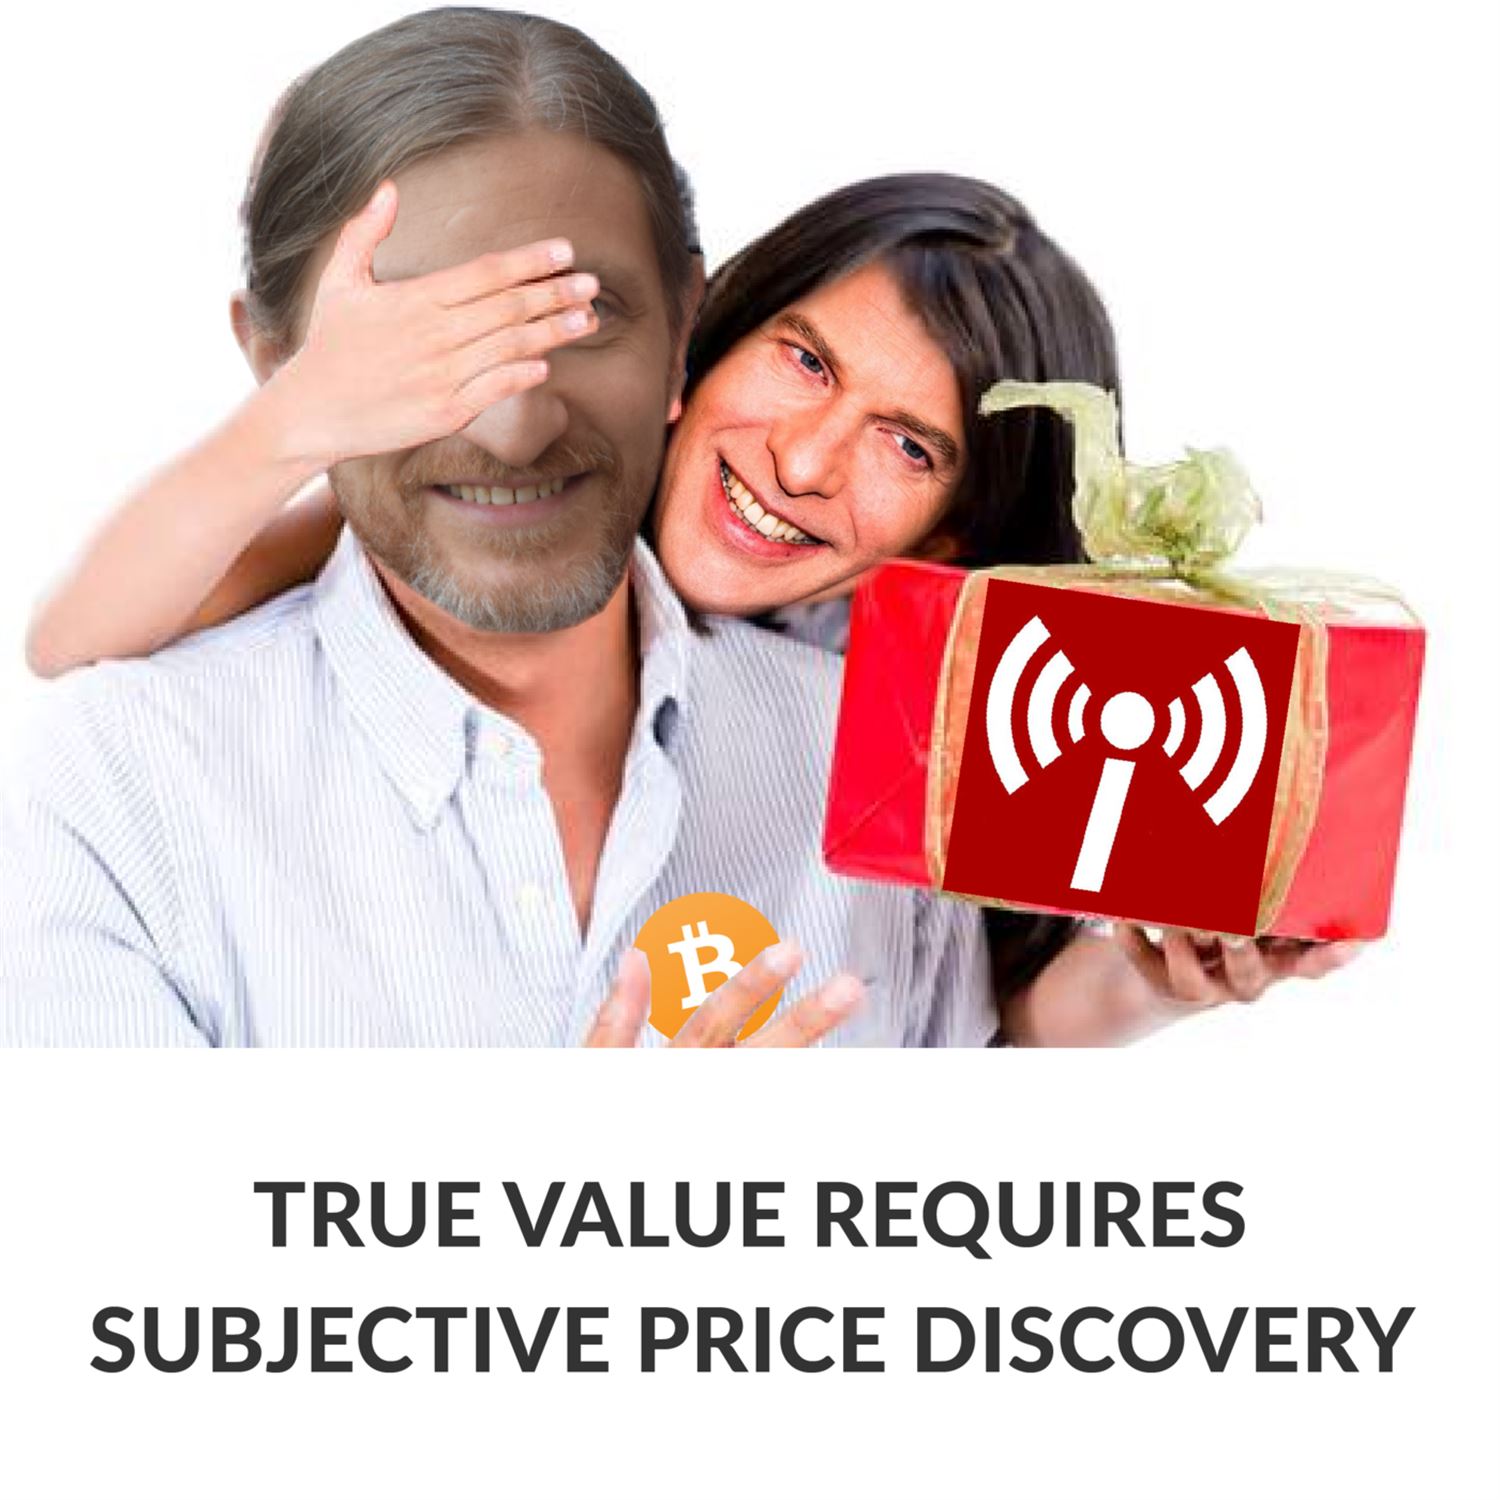 True value requires subjective price discovery